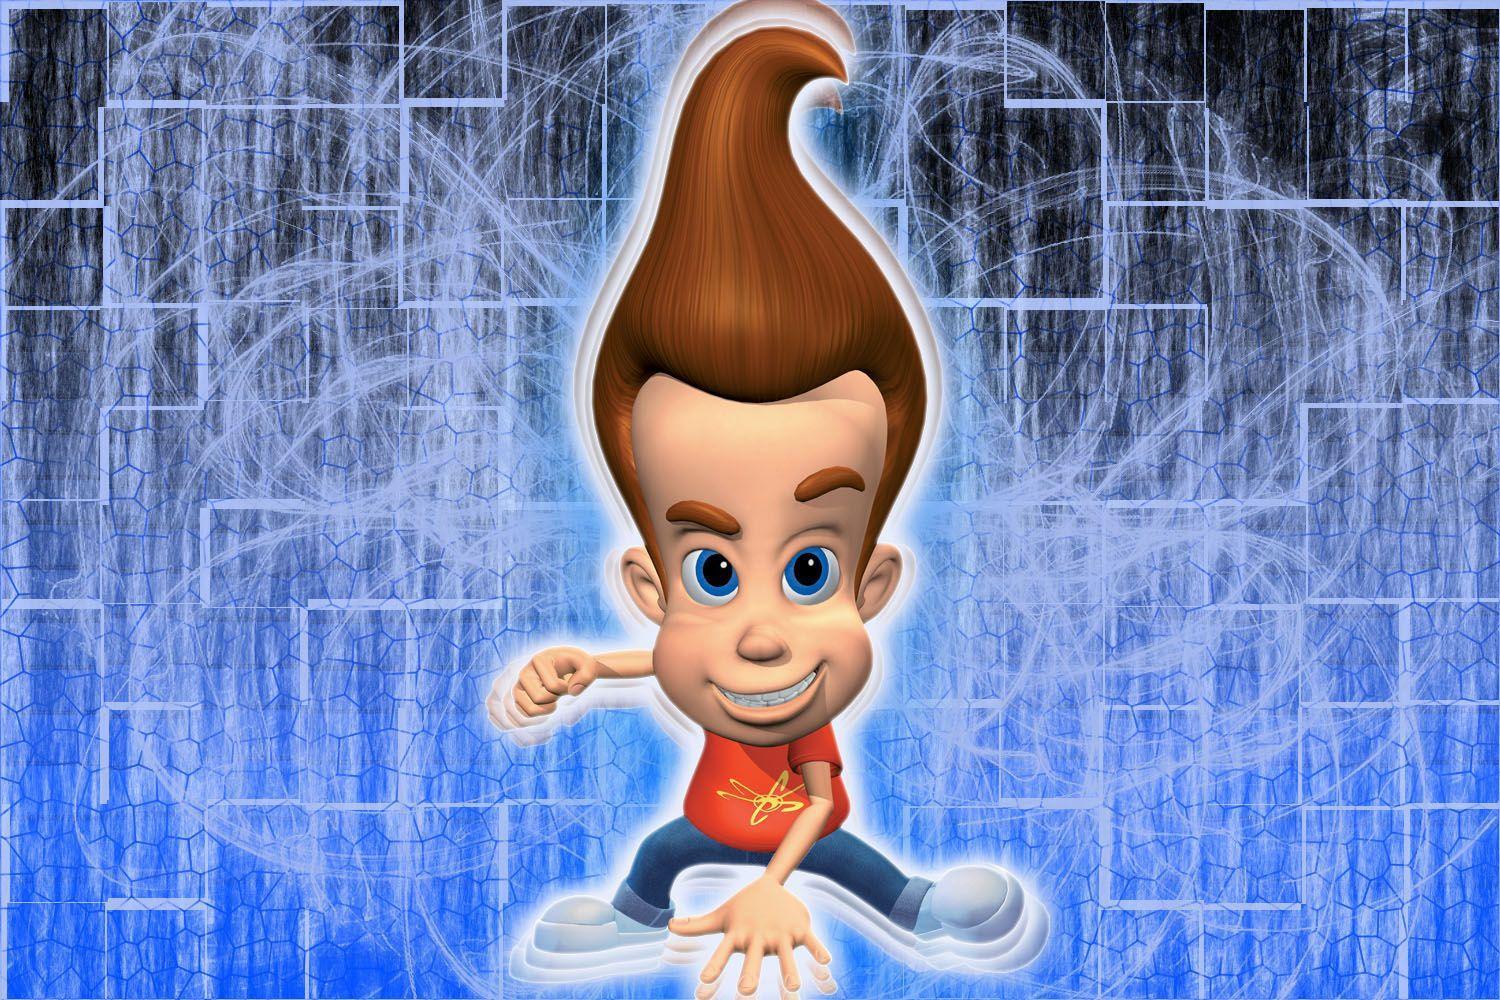 Jimmy Neutron full HD cover picture, Jimmy Neutron full HD cover